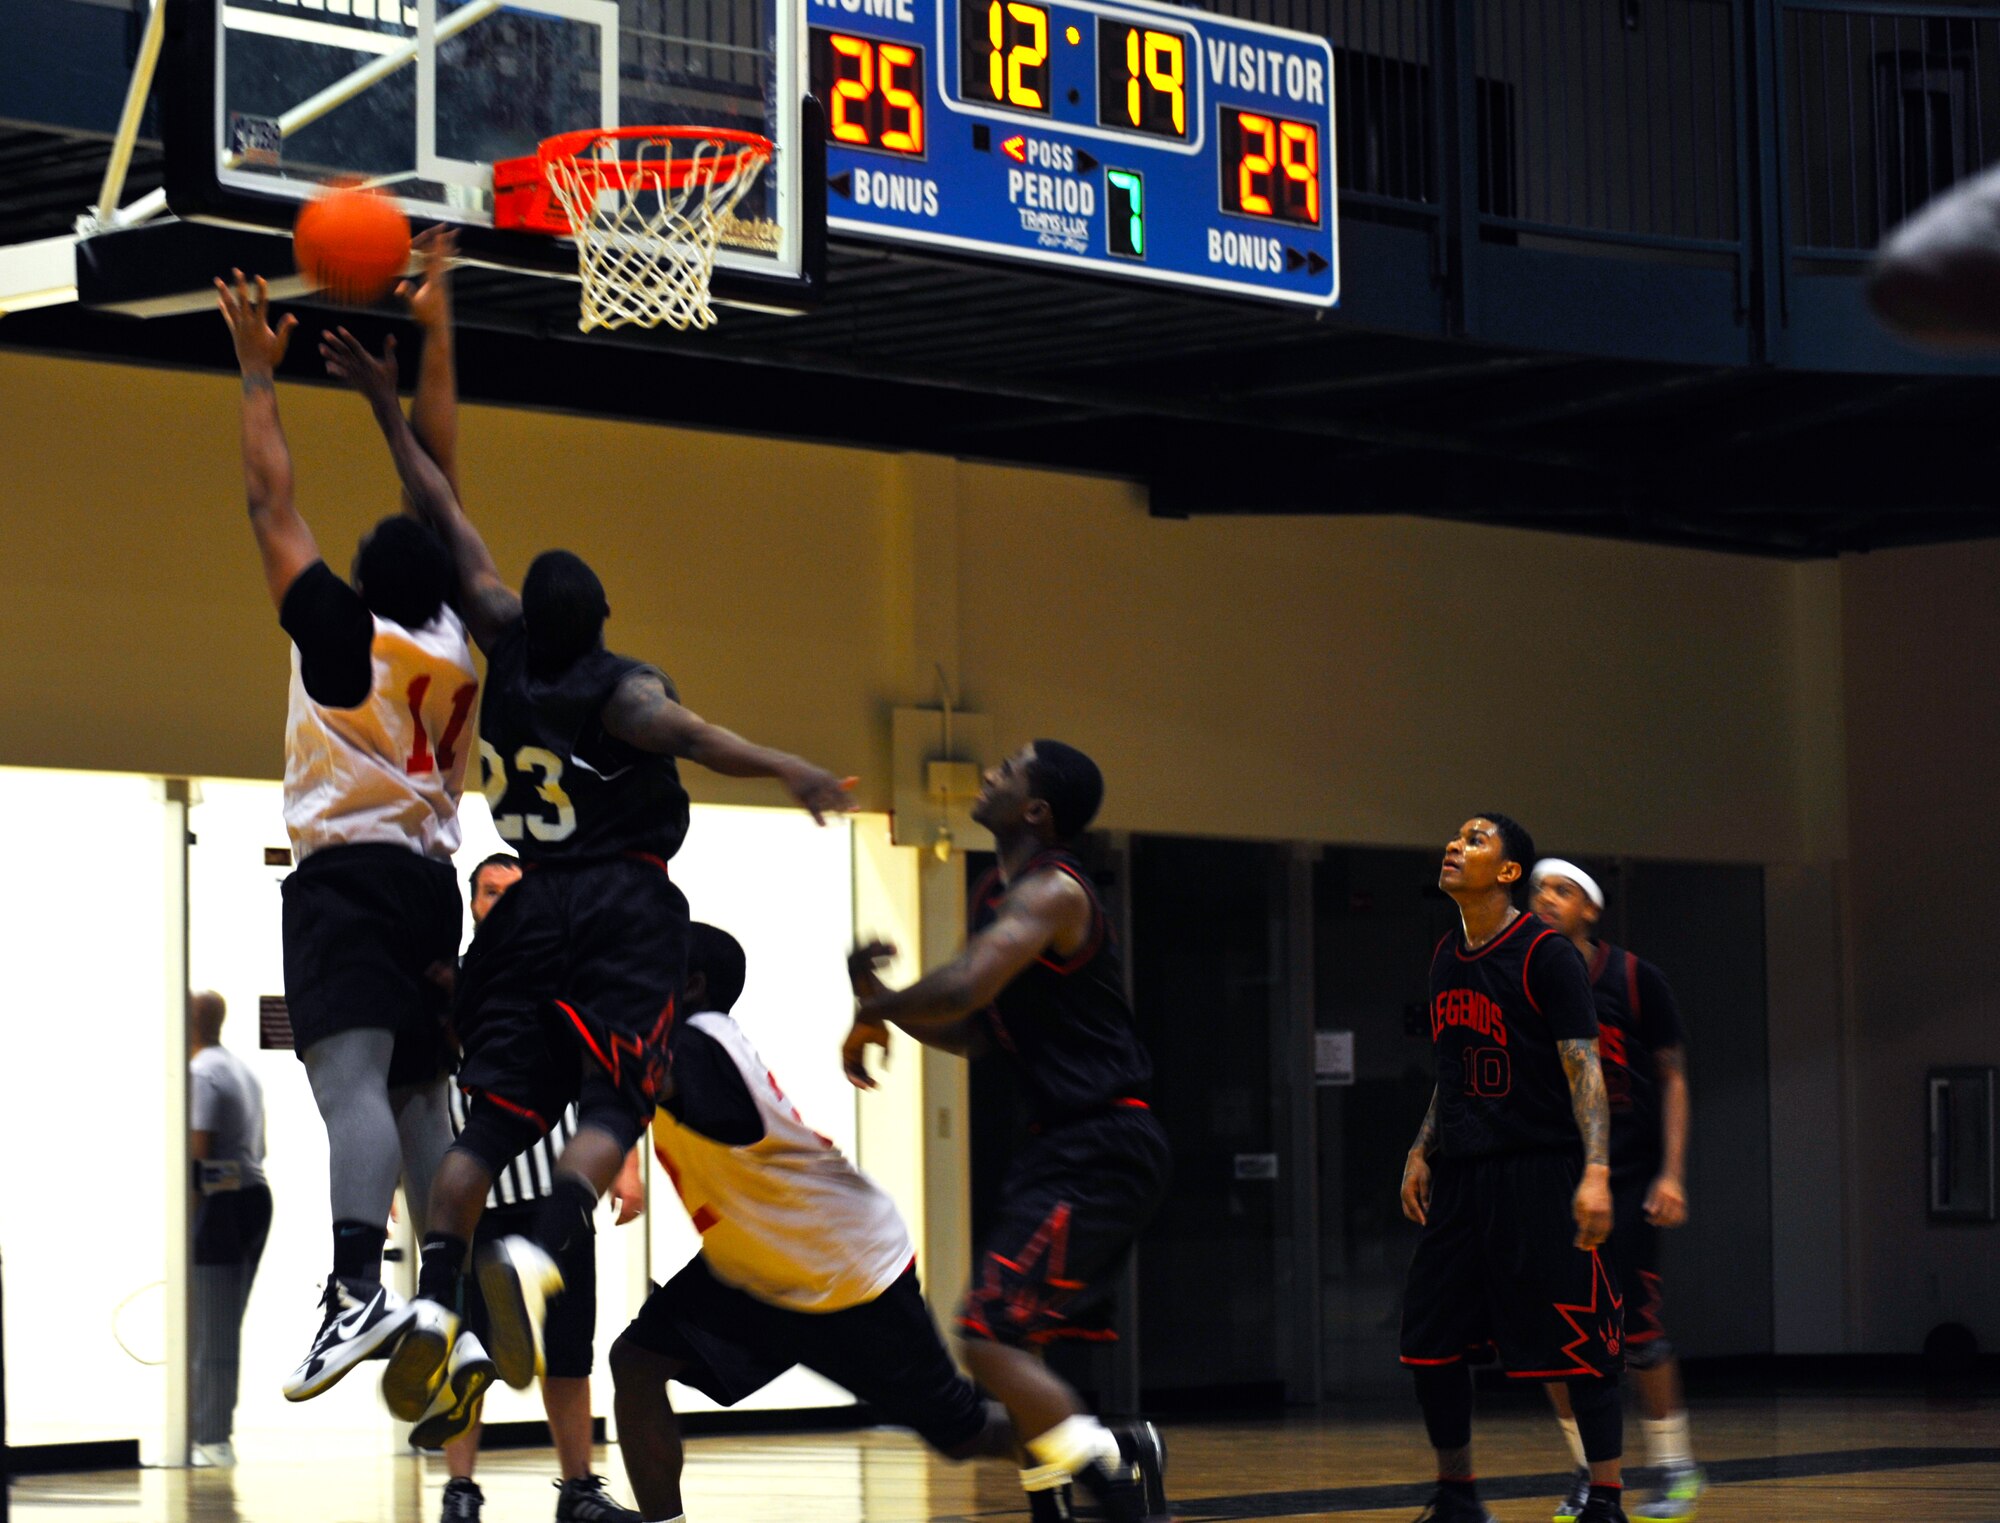 A player from the 19th Force Support Squadron and a player of the 19th Maintenance Group jump for a rebound Jan. 12, 2015, during an intramural basketball game at Little Rock Air Force Base, Ark. The 19th MXG defeated the 19th FSS 55-46. (U.S. Air Force photo by Senior Airman Stephanie Serrano)